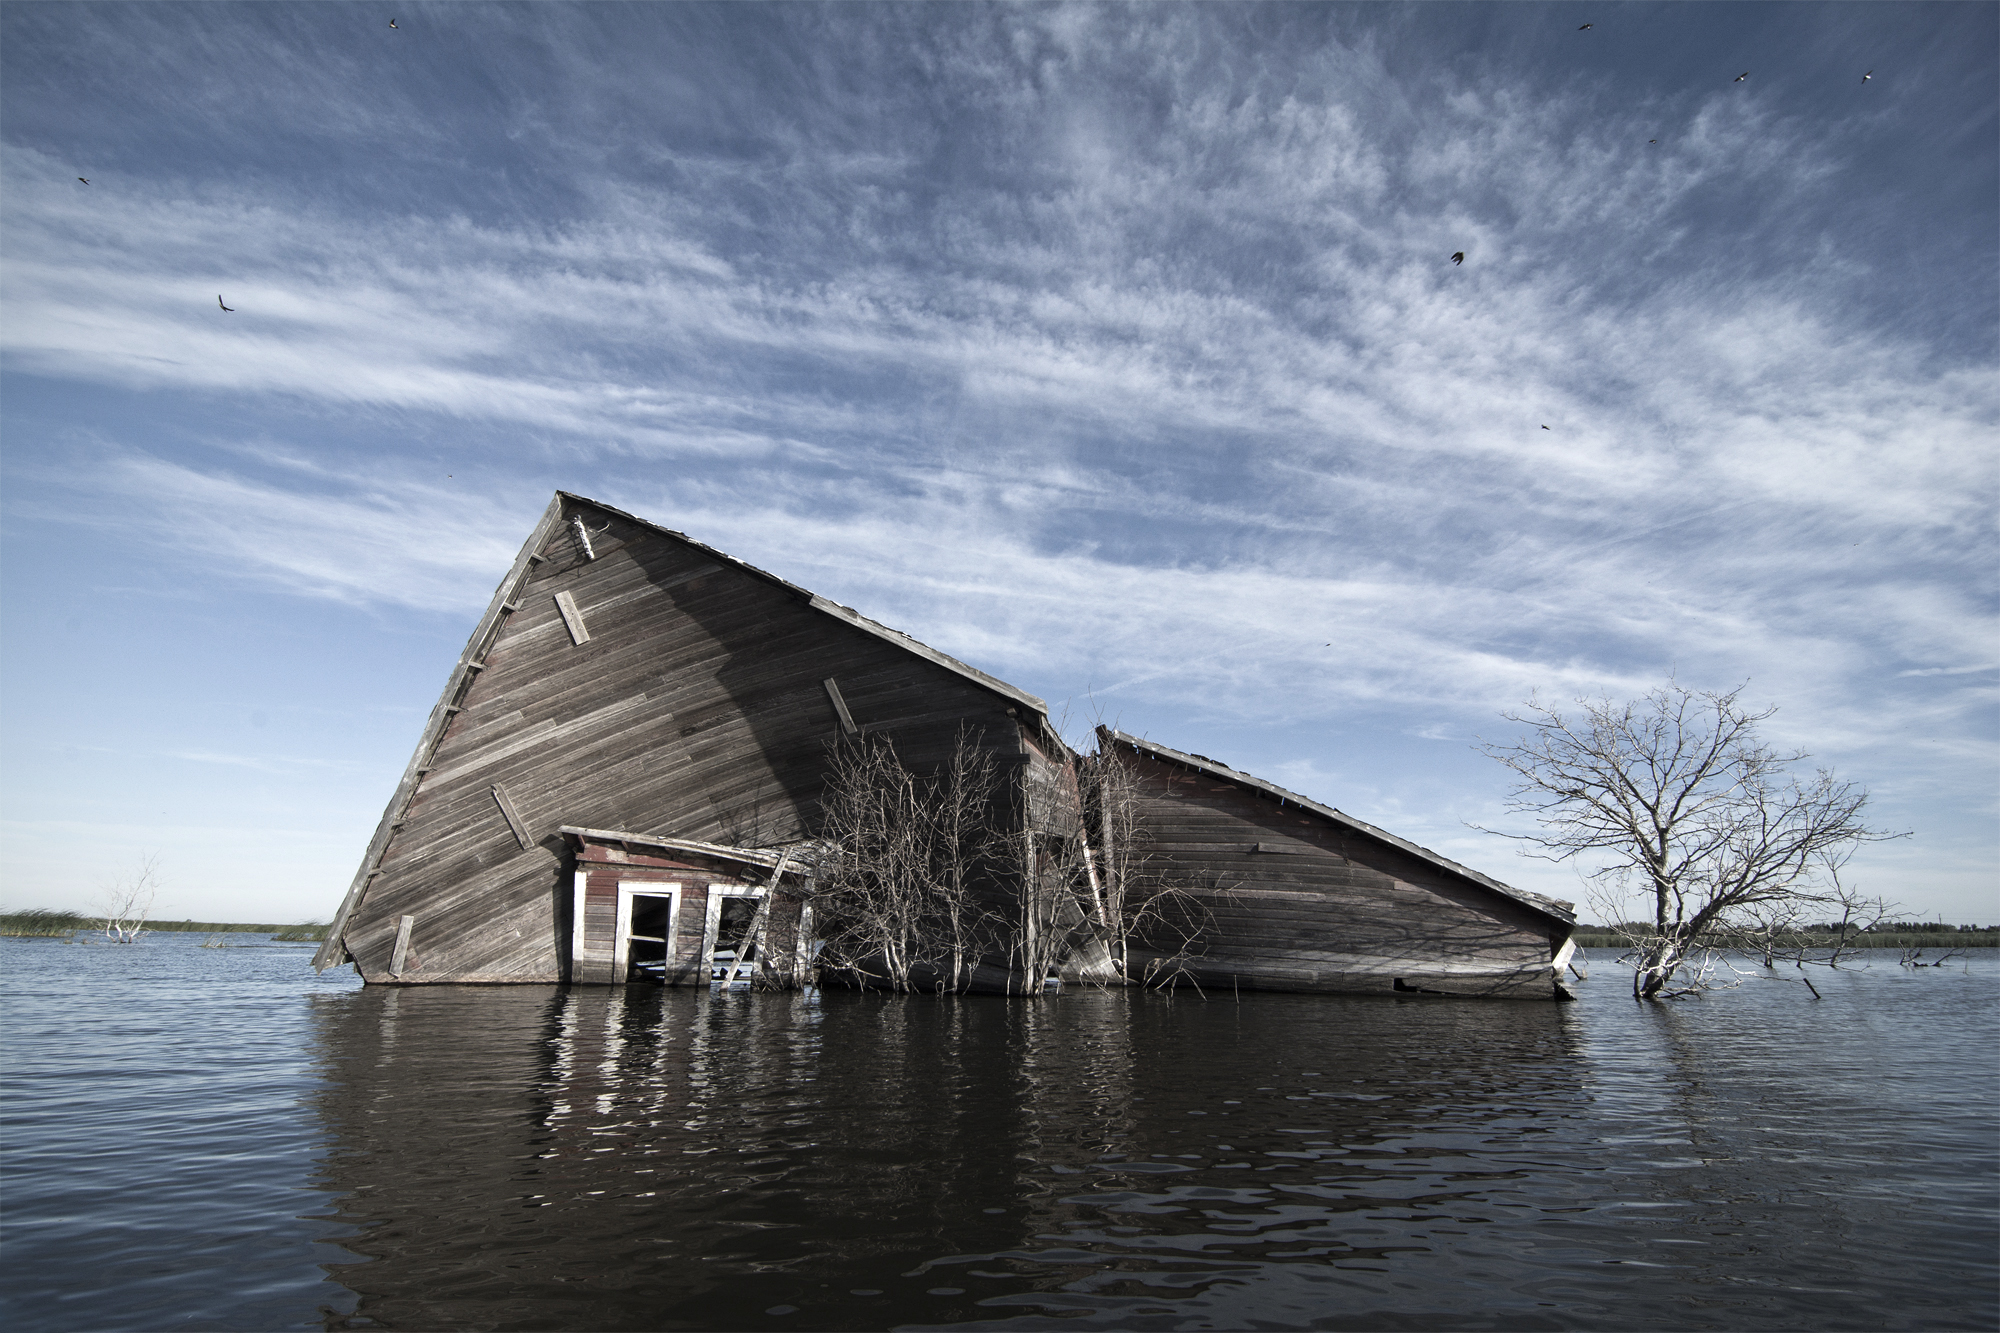 Photographs by Paul Johnson Document a Once-Thriving Farm Community Subsumed by Rising Waters